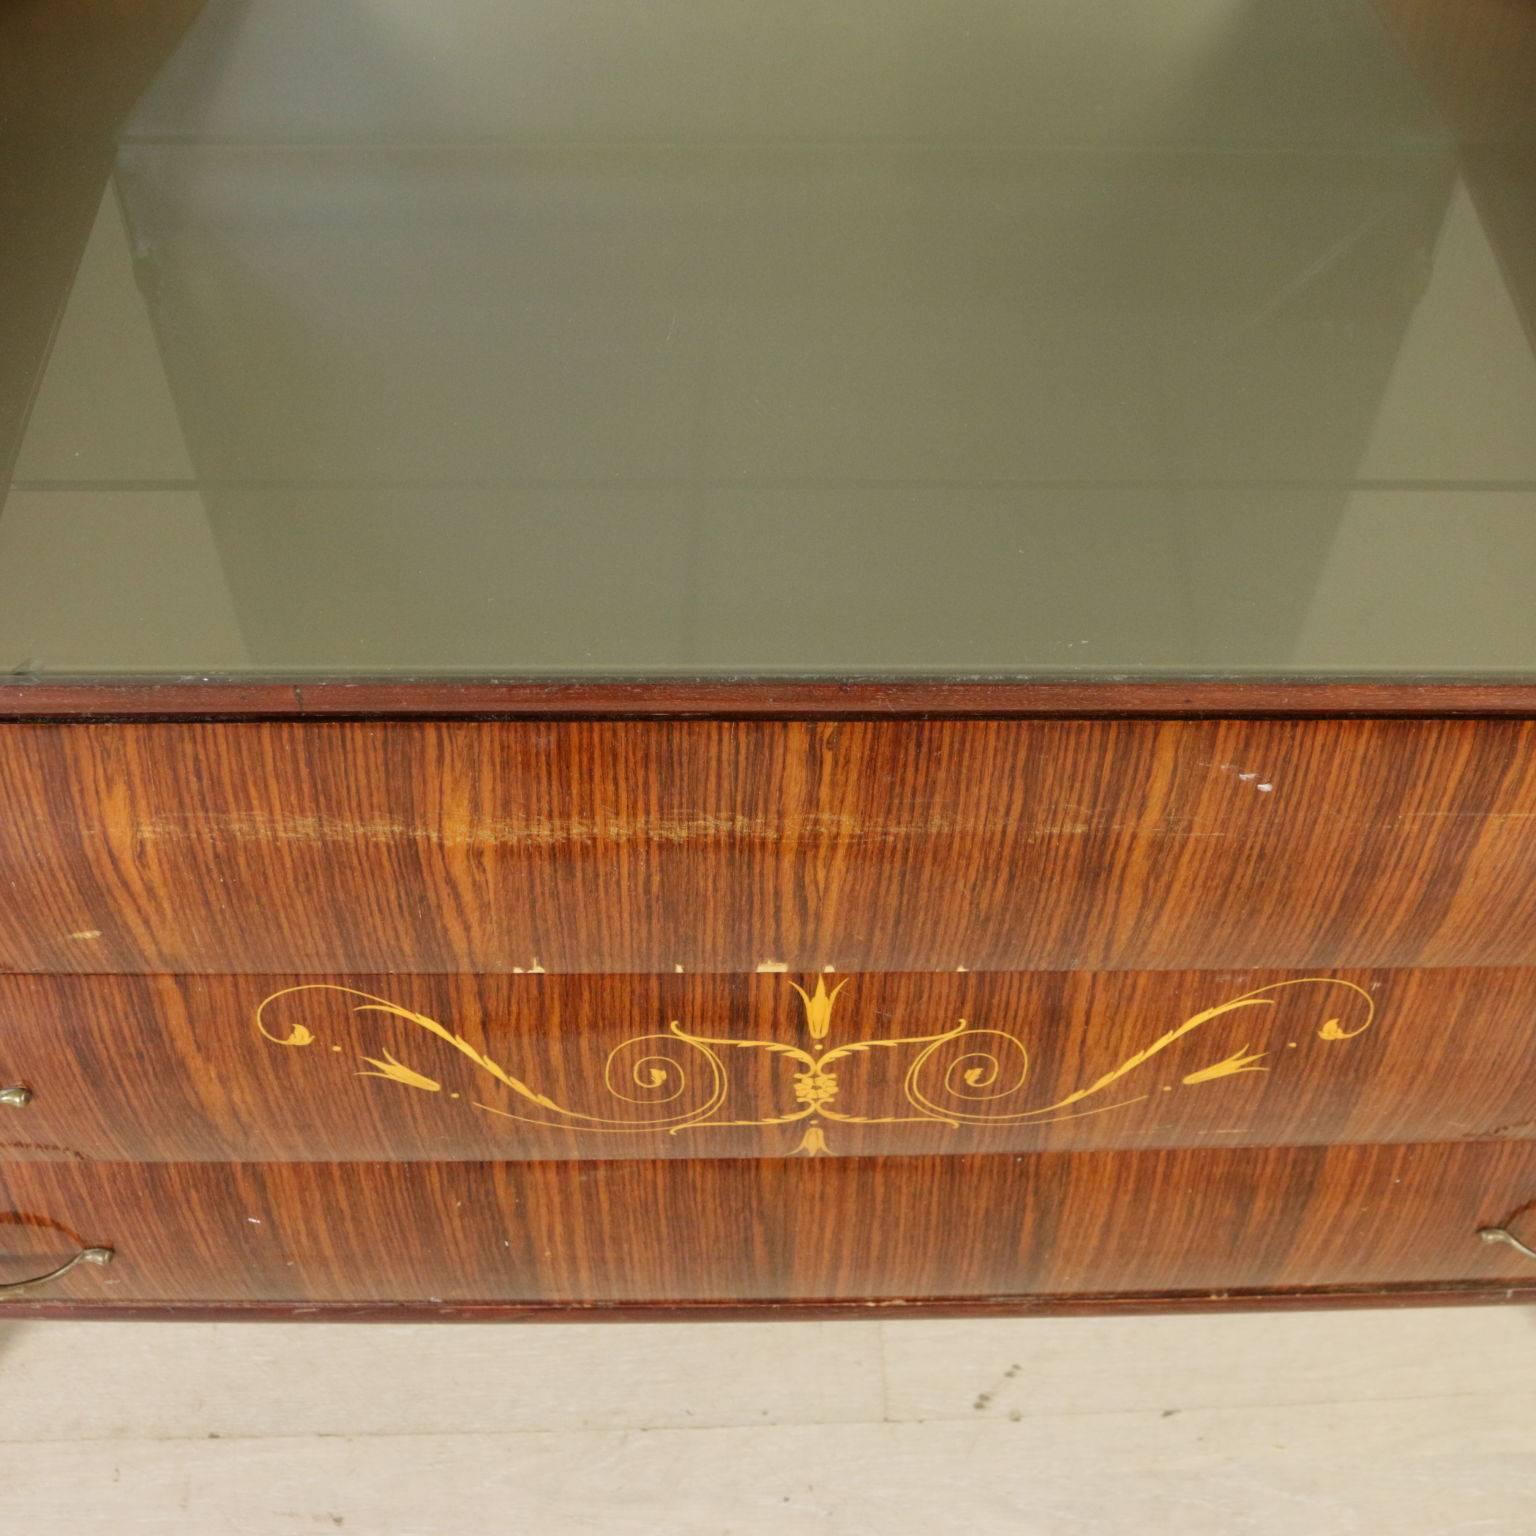 Italian Chest of Drawers with Mirror, Rosewood Veneer, Inlaid Floral Decorations